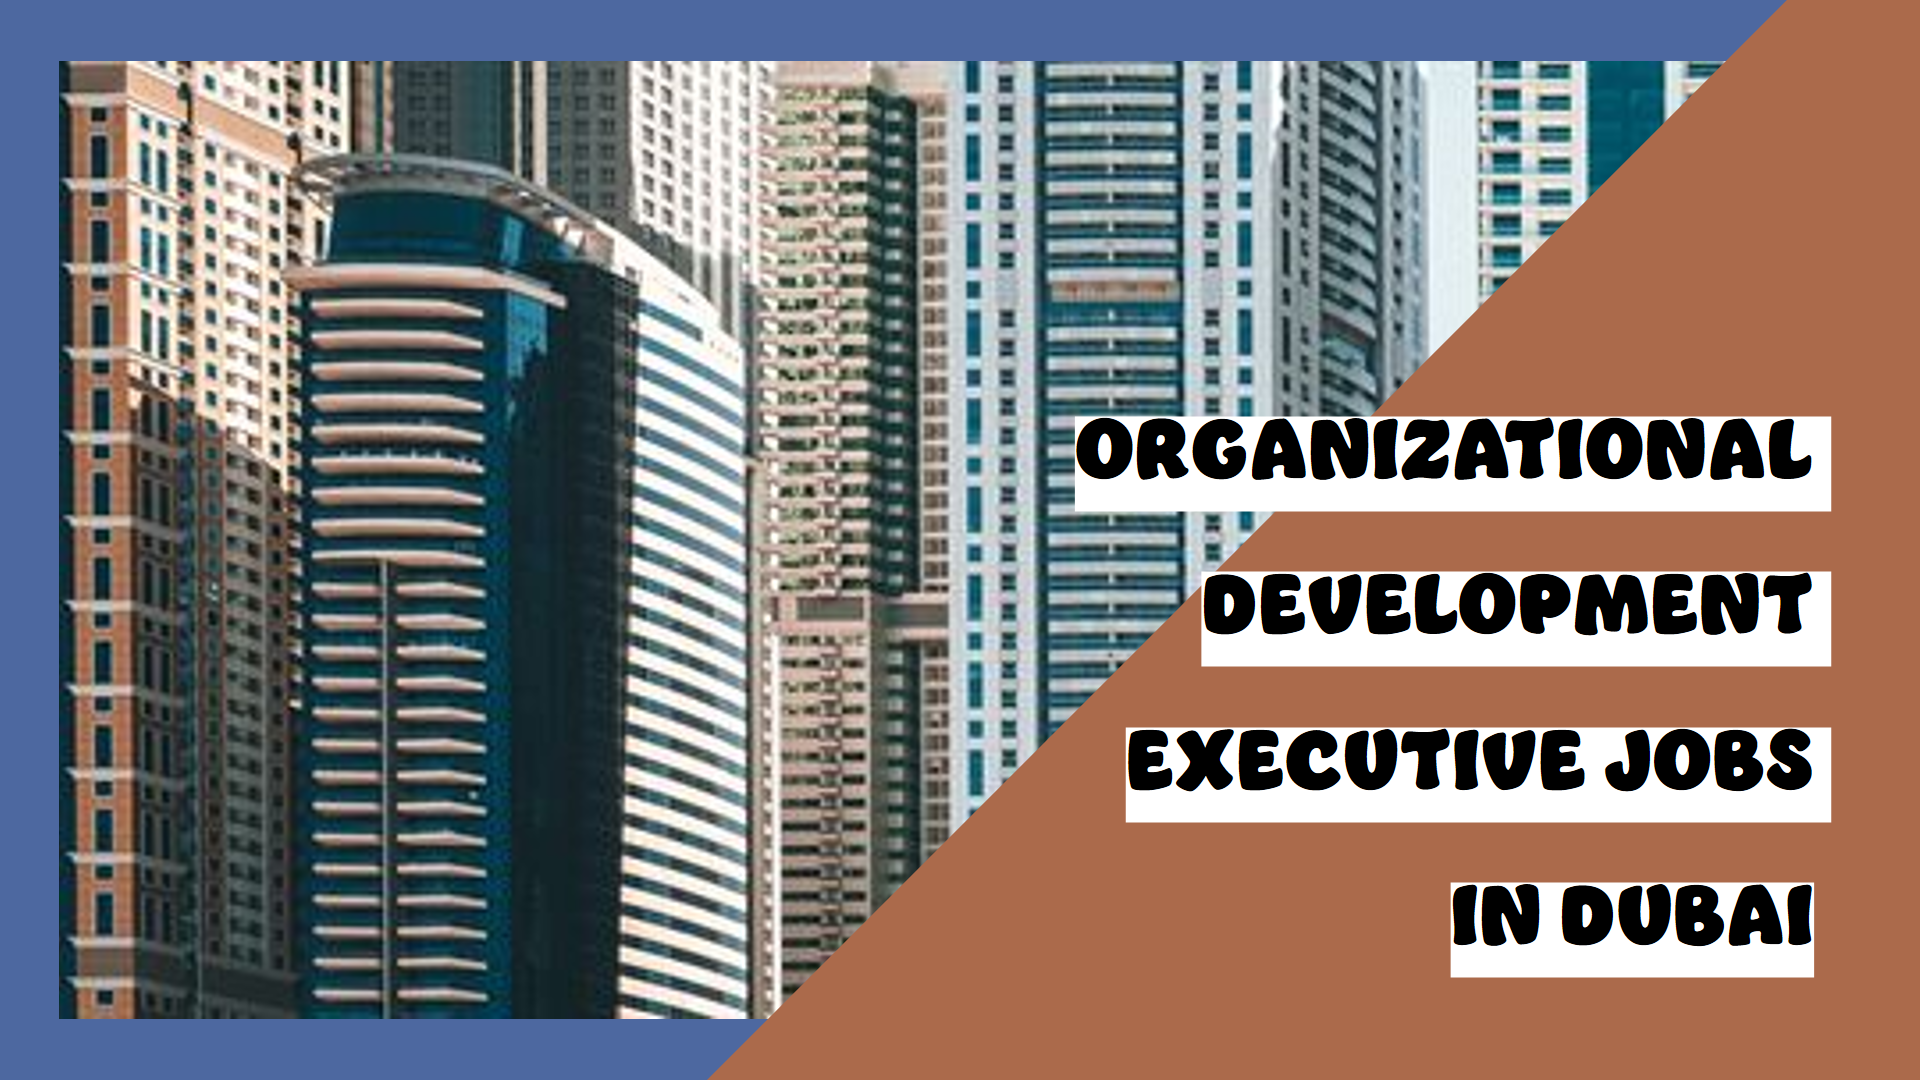 Organizational Development Executive jobs in Dubai for all nationalities with salary 15,000 to 20,000 AED